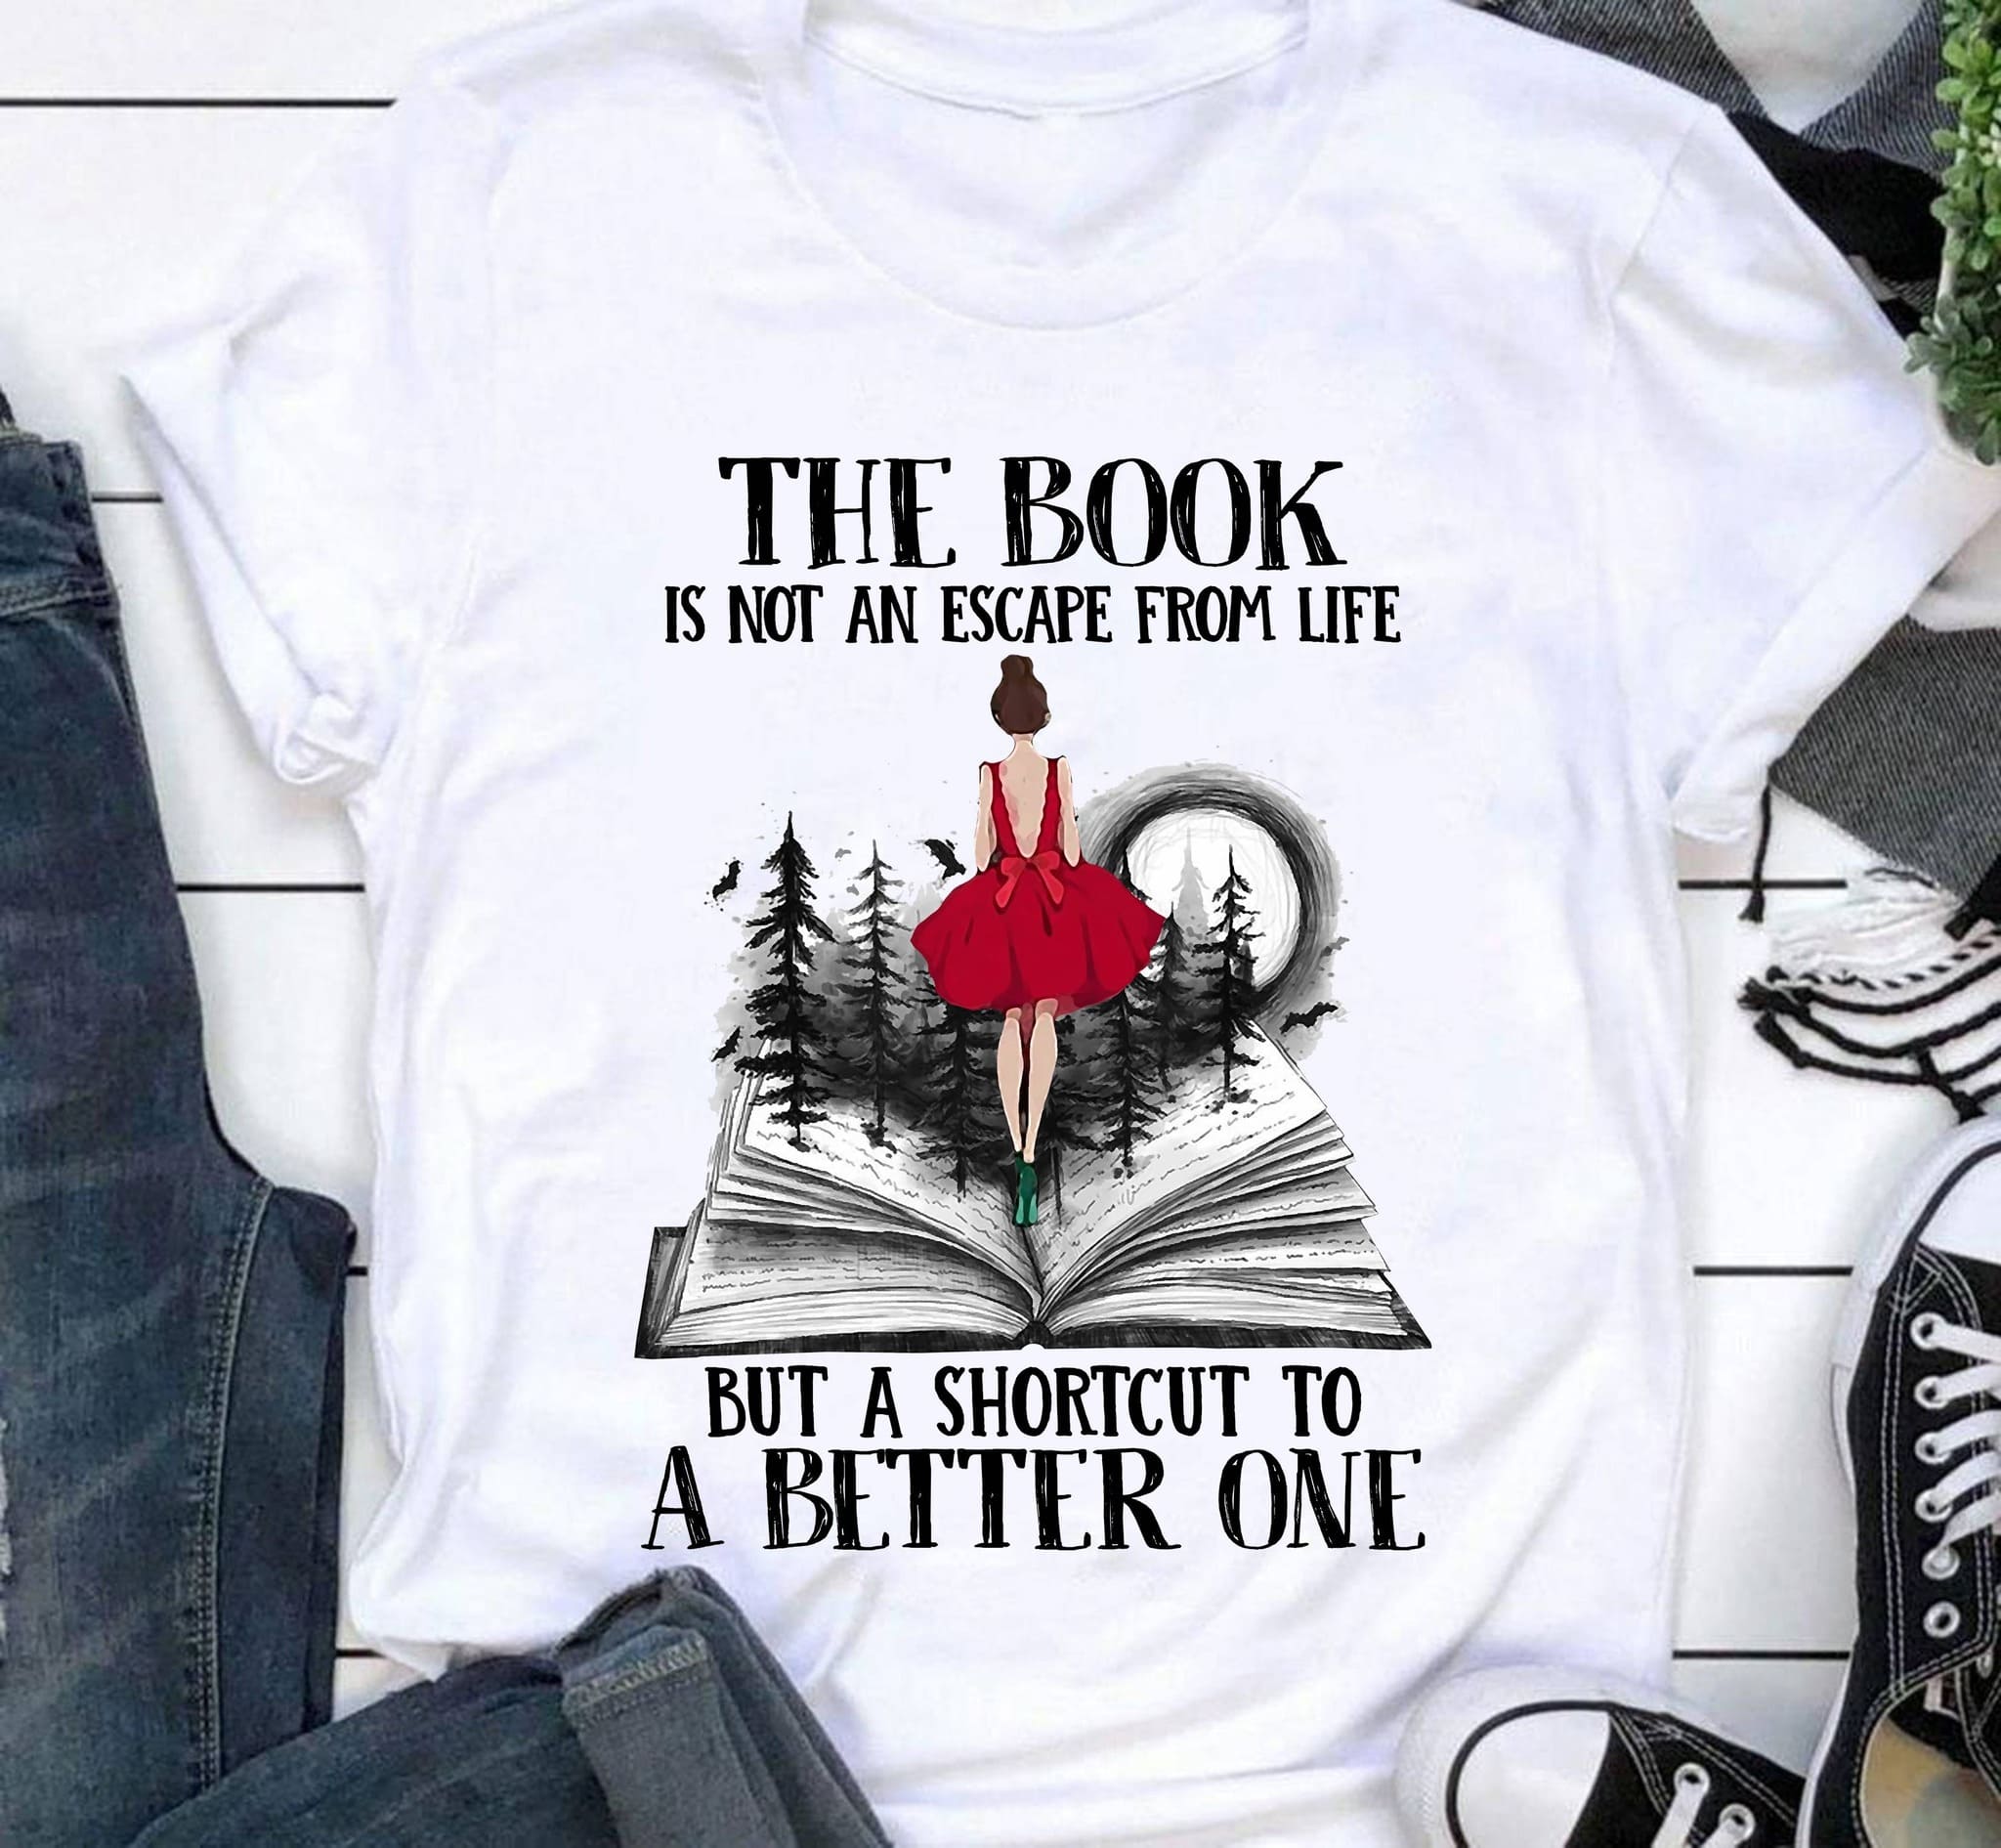 The book is not an escape from life but a shortcut to a better one - Girl loves book